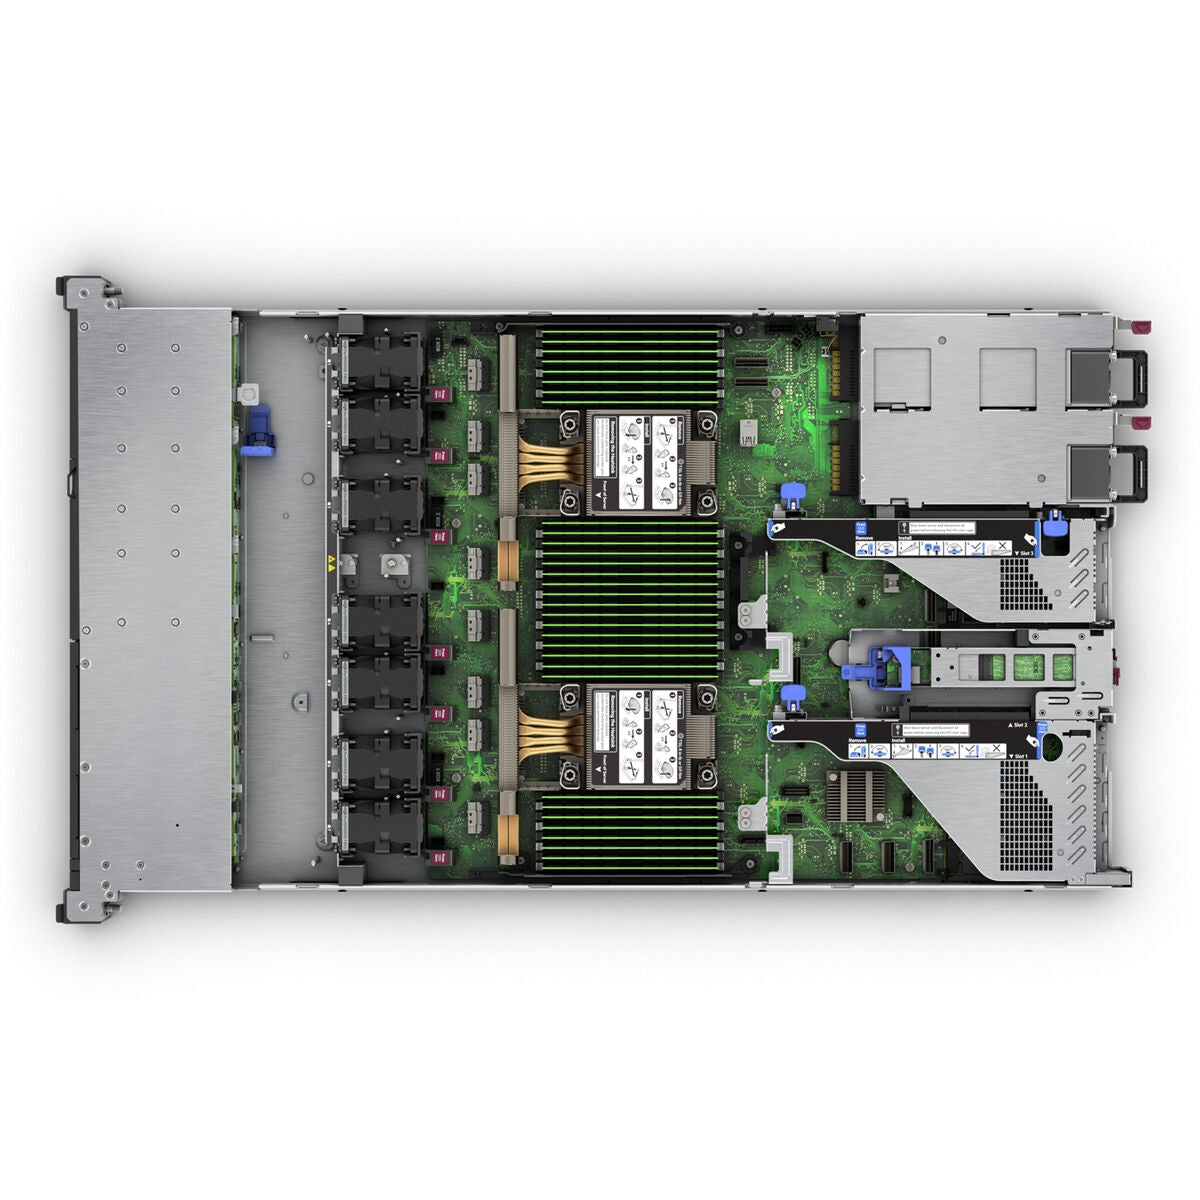 Server HPE P60734-421 Intel Xeon Silver 4416+ 32 GB RAM, HPE, Computing, server-hpe-p60734-421-intel-xeon-silver-4416-32-gb-ram, Brand_HPE, category-reference-2609, category-reference-2791, category-reference-2799, category-reference-t-19685, category-reference-t-19905, computers / components, Condition_NEW, office, Price_+ 1000, Teleworking, RiotNook